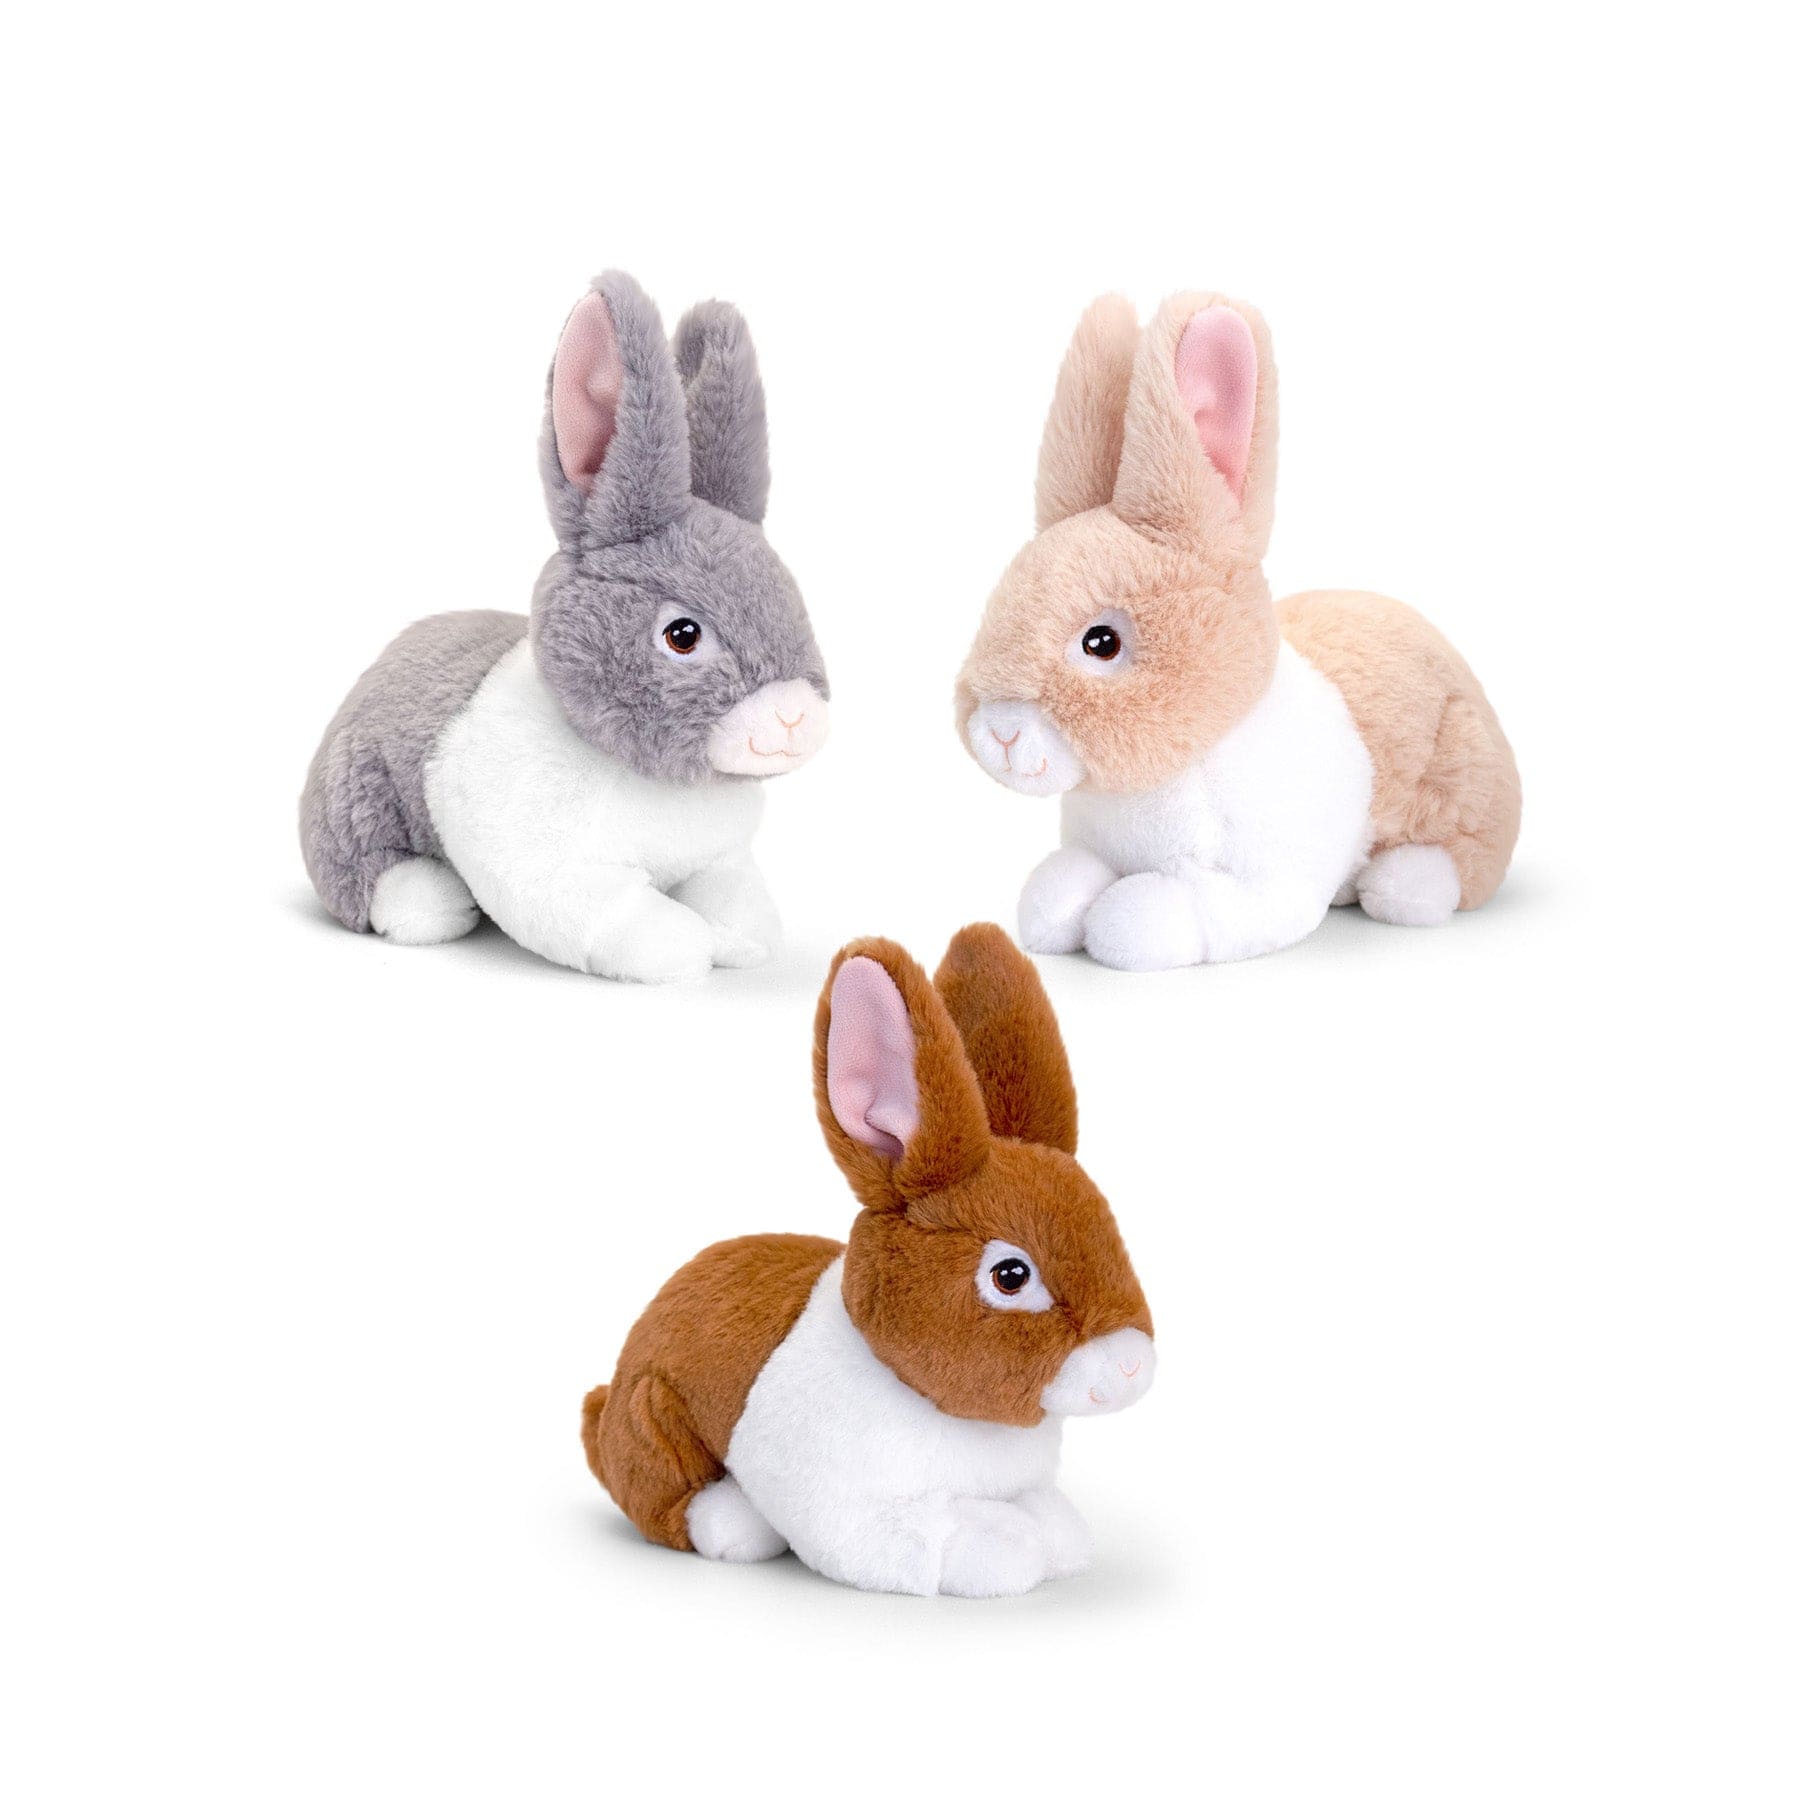 Three plush toy rabbits in different colors isolated on a white background